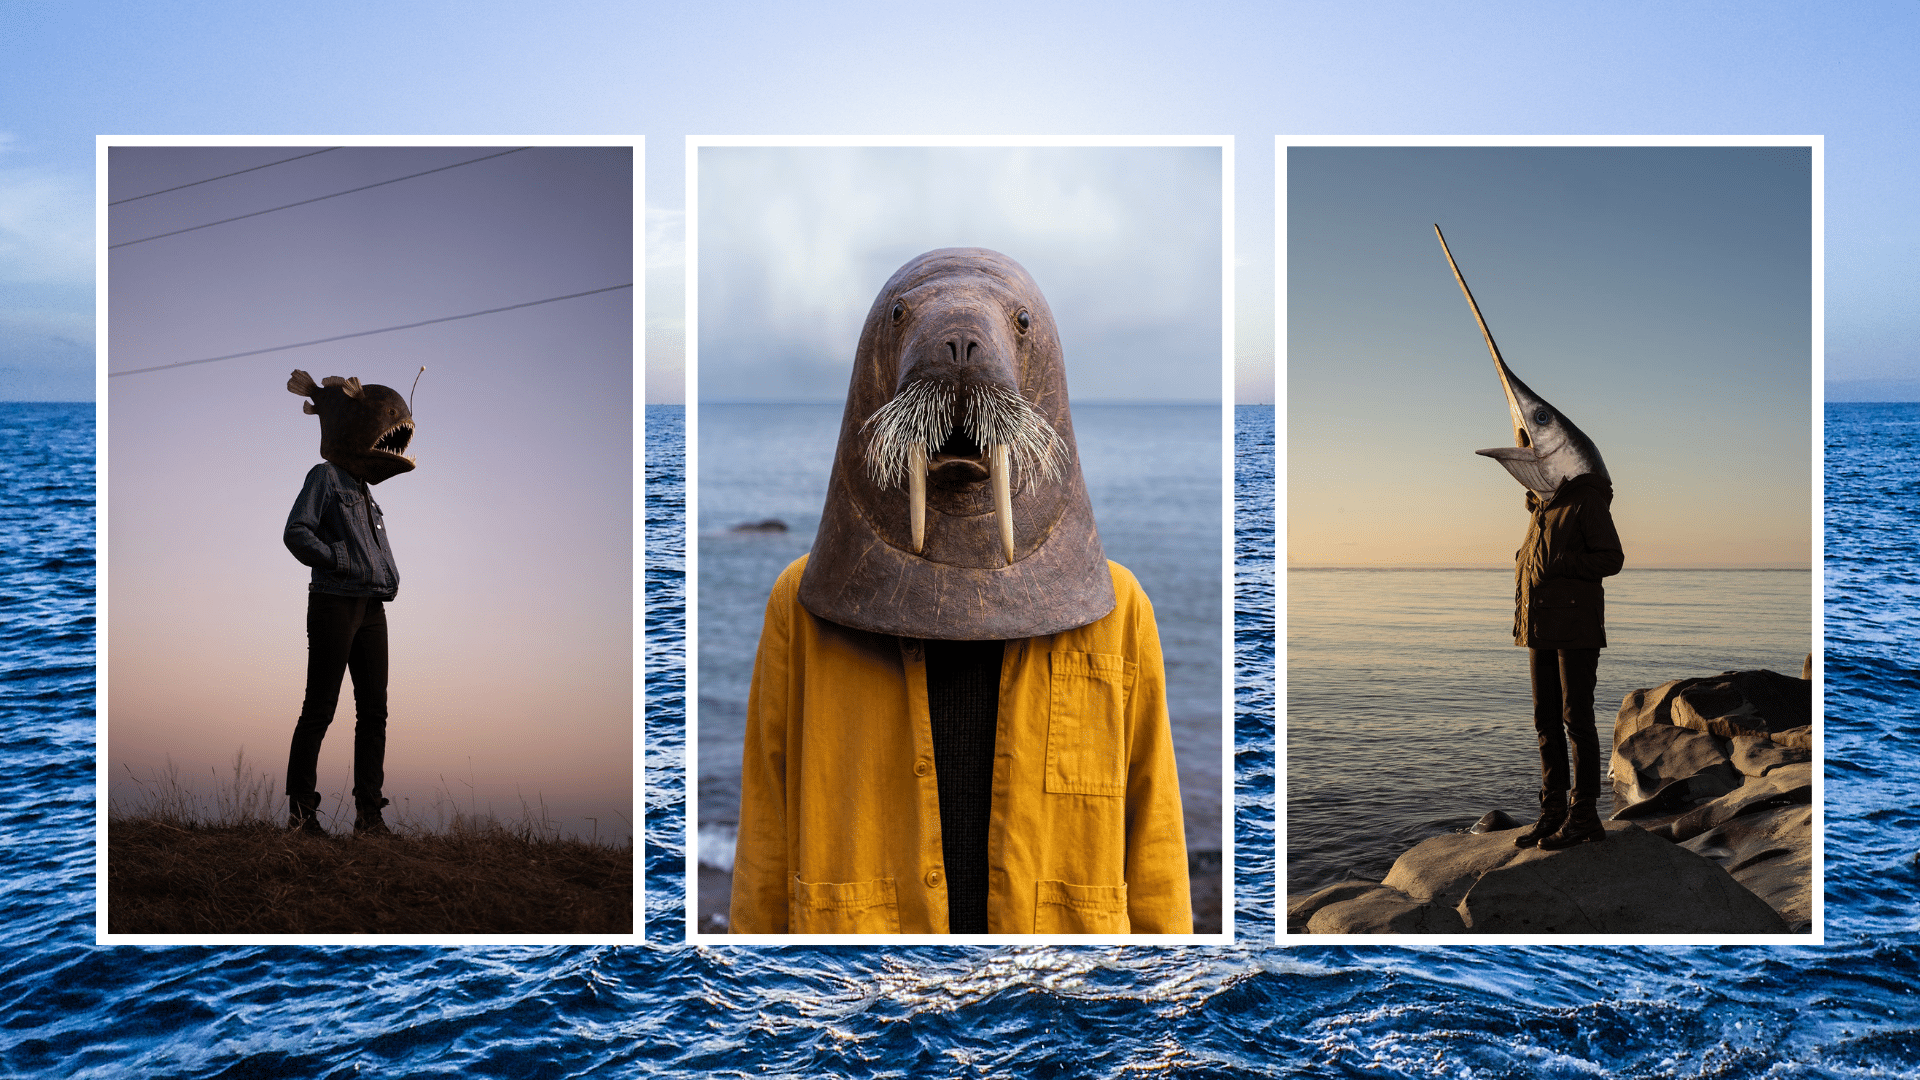 A collection of three images from the story over an image of an ocean